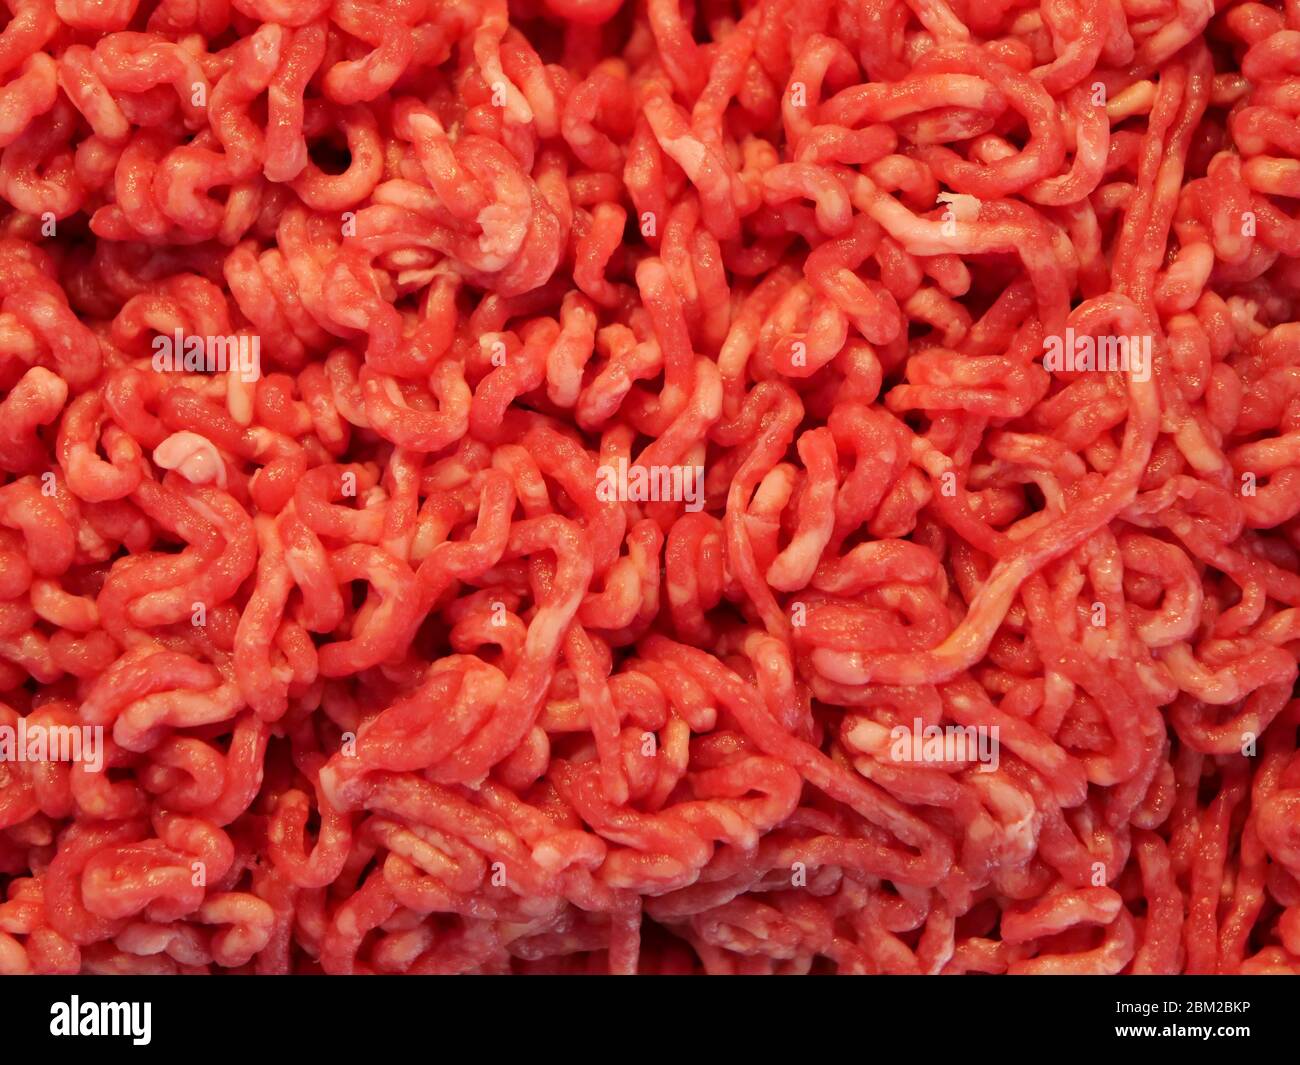 Cooking with fresh raw ground beef Stock Photo